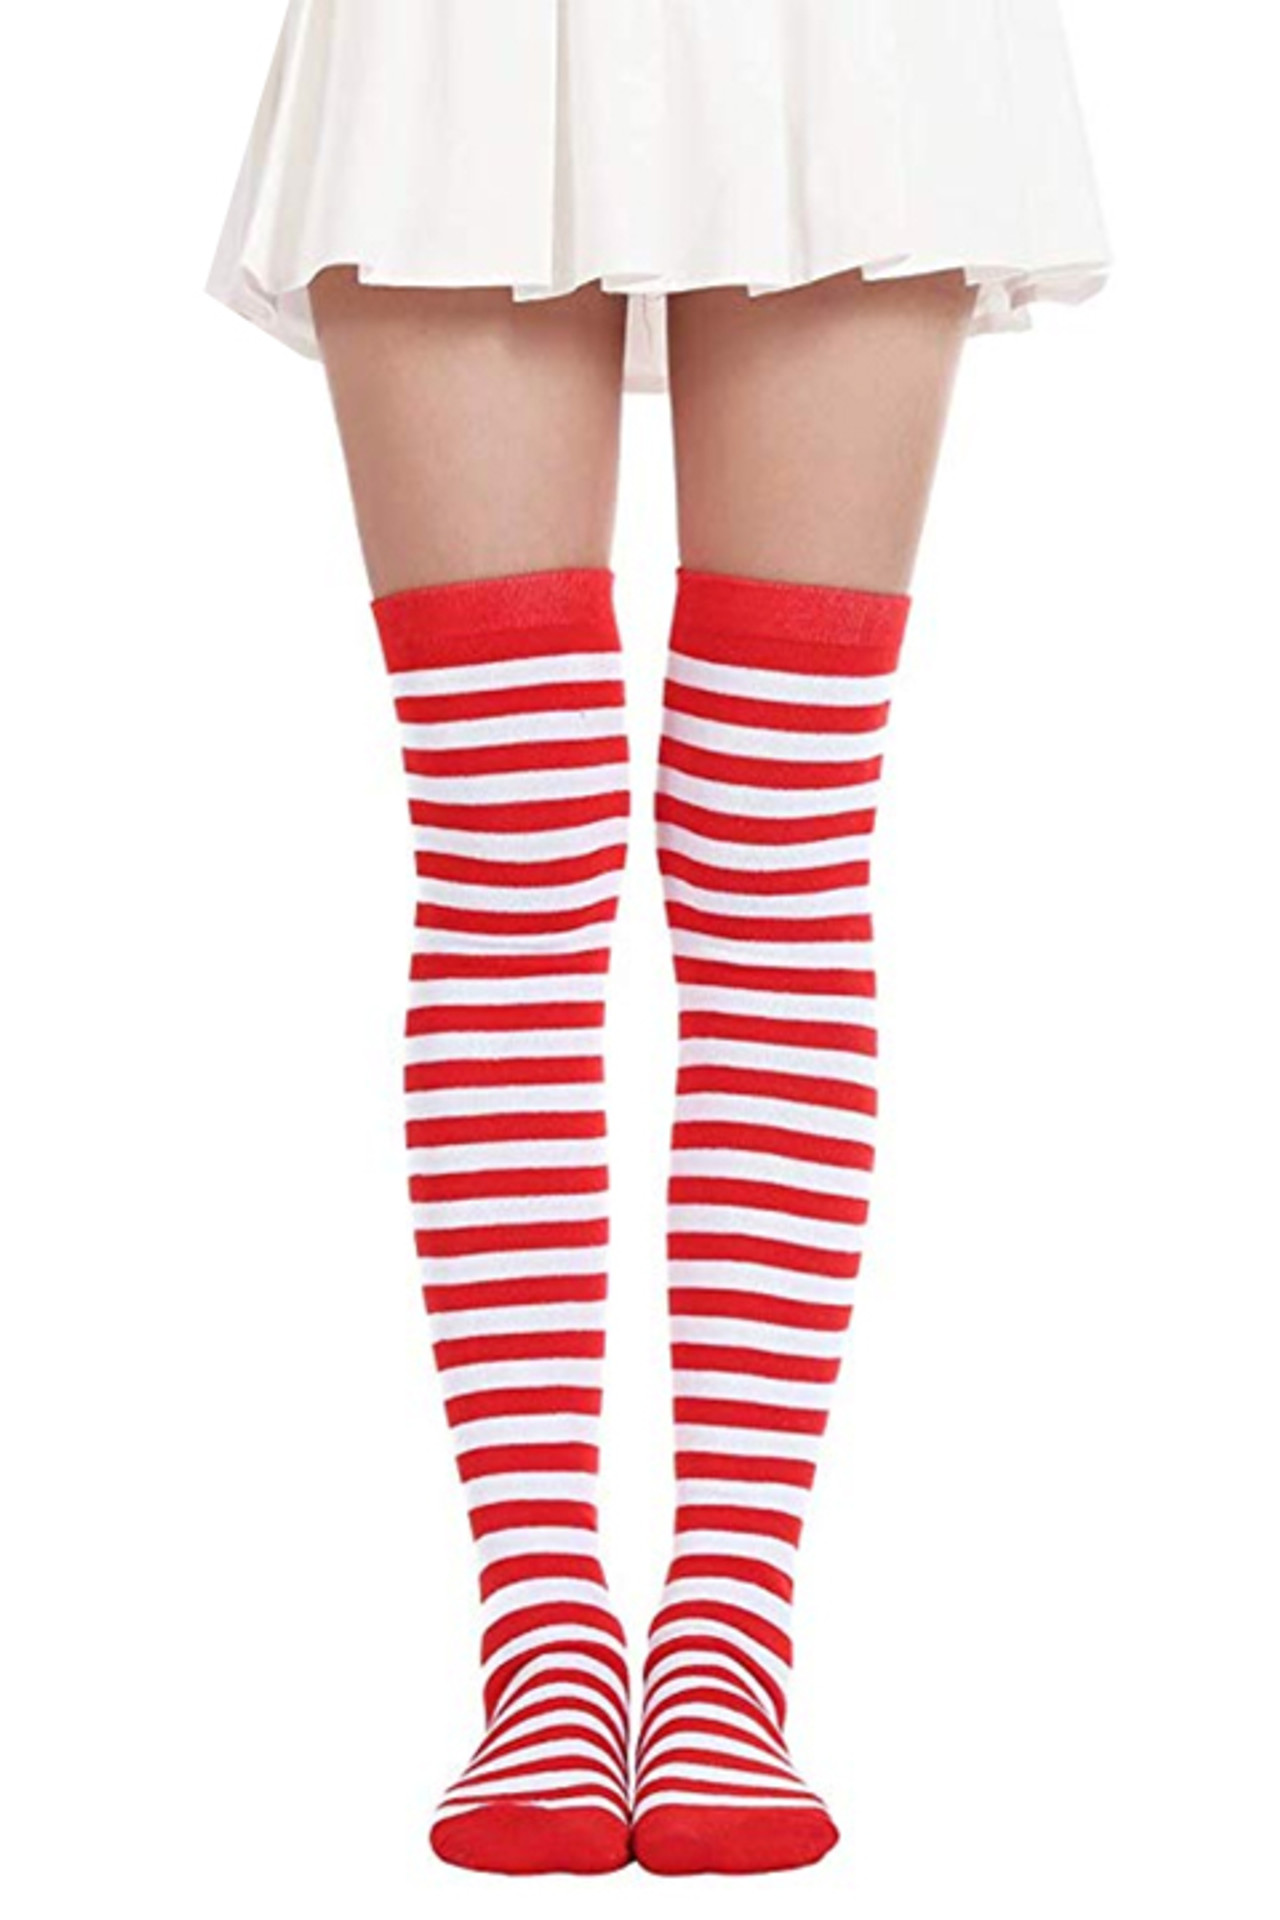 th Medicin bånd Red White Stripes Holiday Over the Knee High Christmas Socks - Shop  costumes Lucky Doll PH